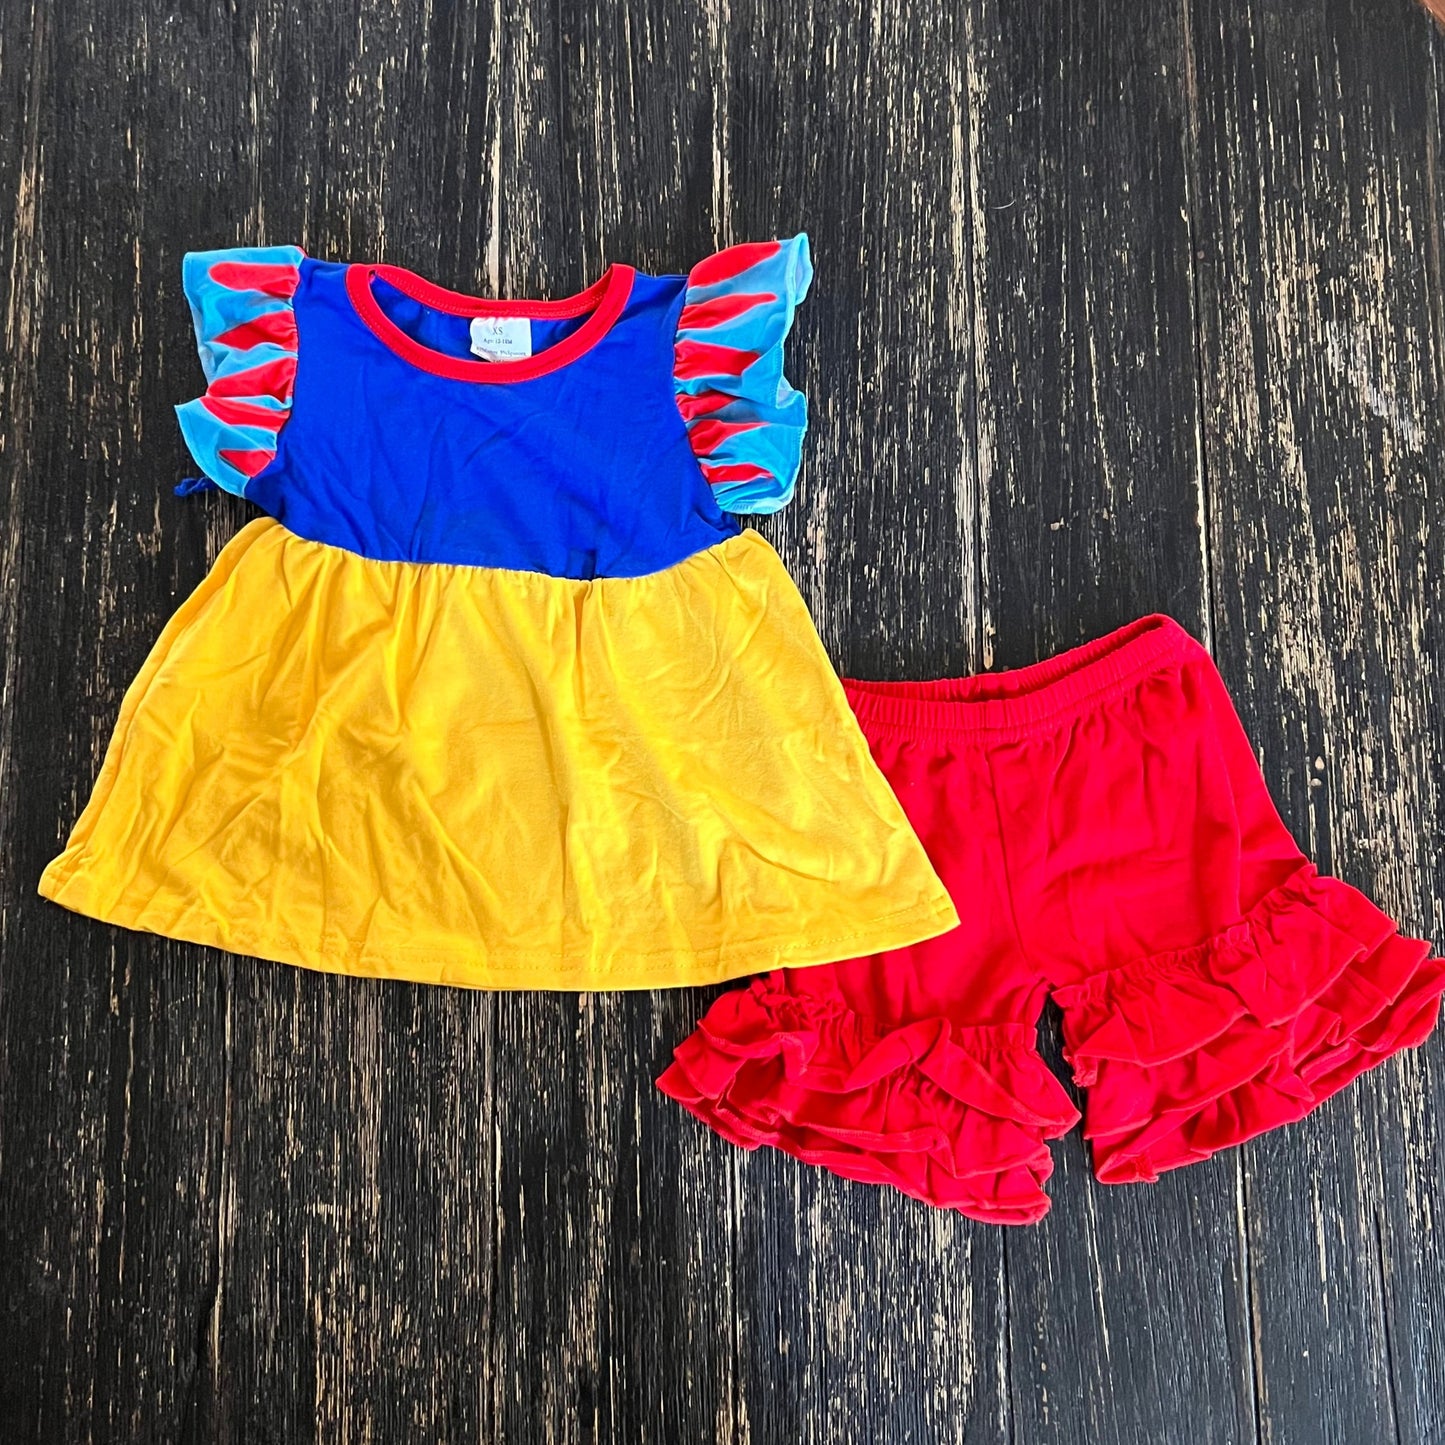 Princess, mouse, and castle inspired embroidered short set